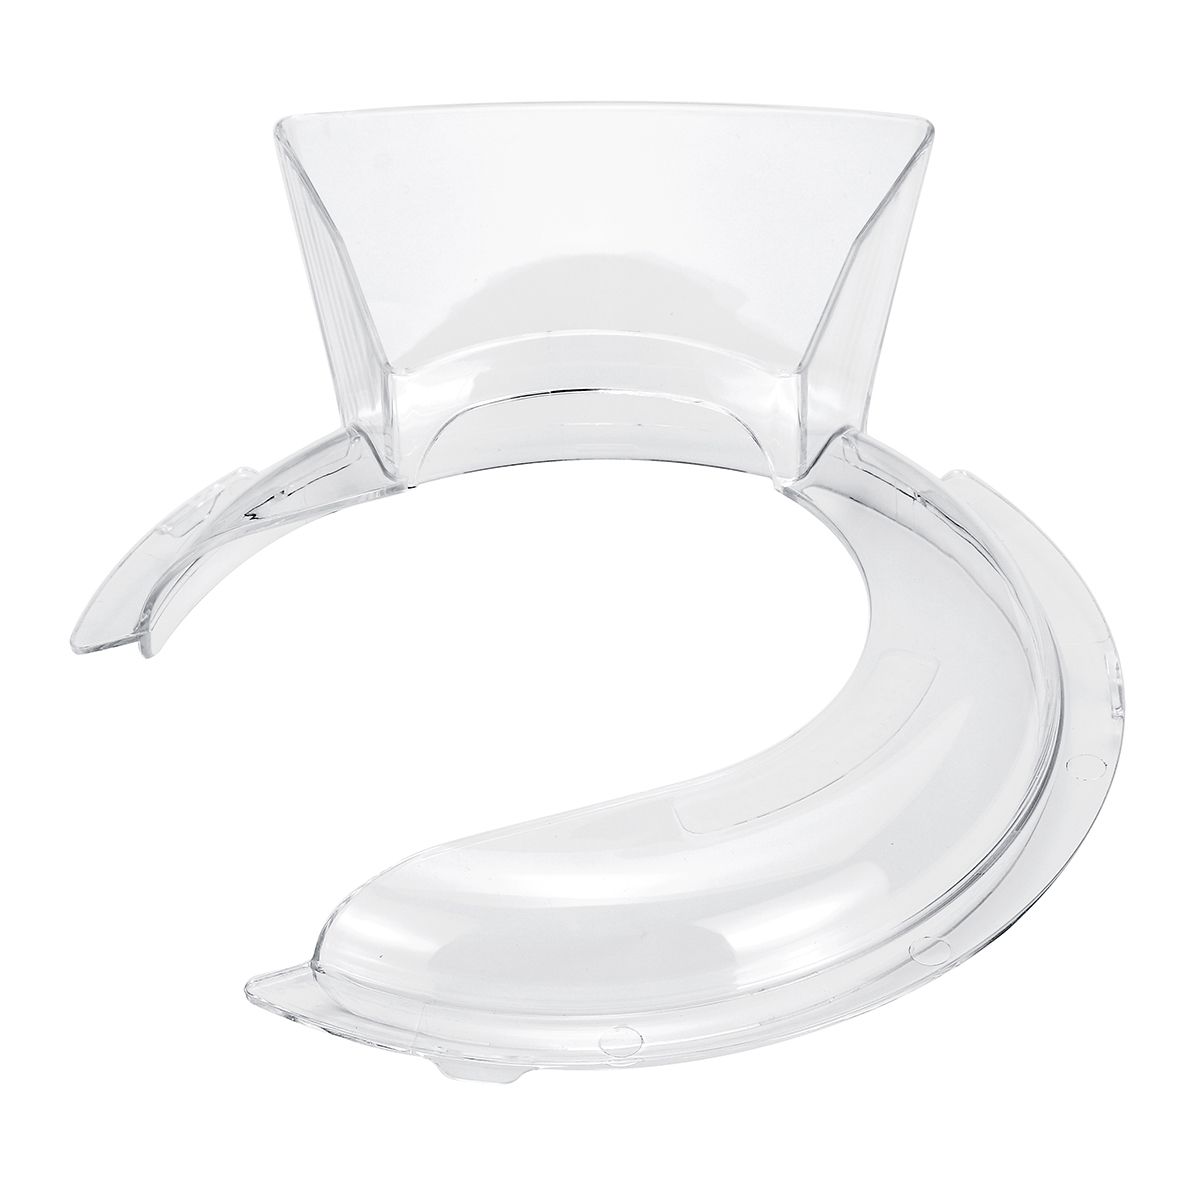 45-5QT-ABS-Bowl-Pouring-Shield-Tilt-Head-for-KitchenAid-Stand-Mixer-Replacement-Accessories-1636695